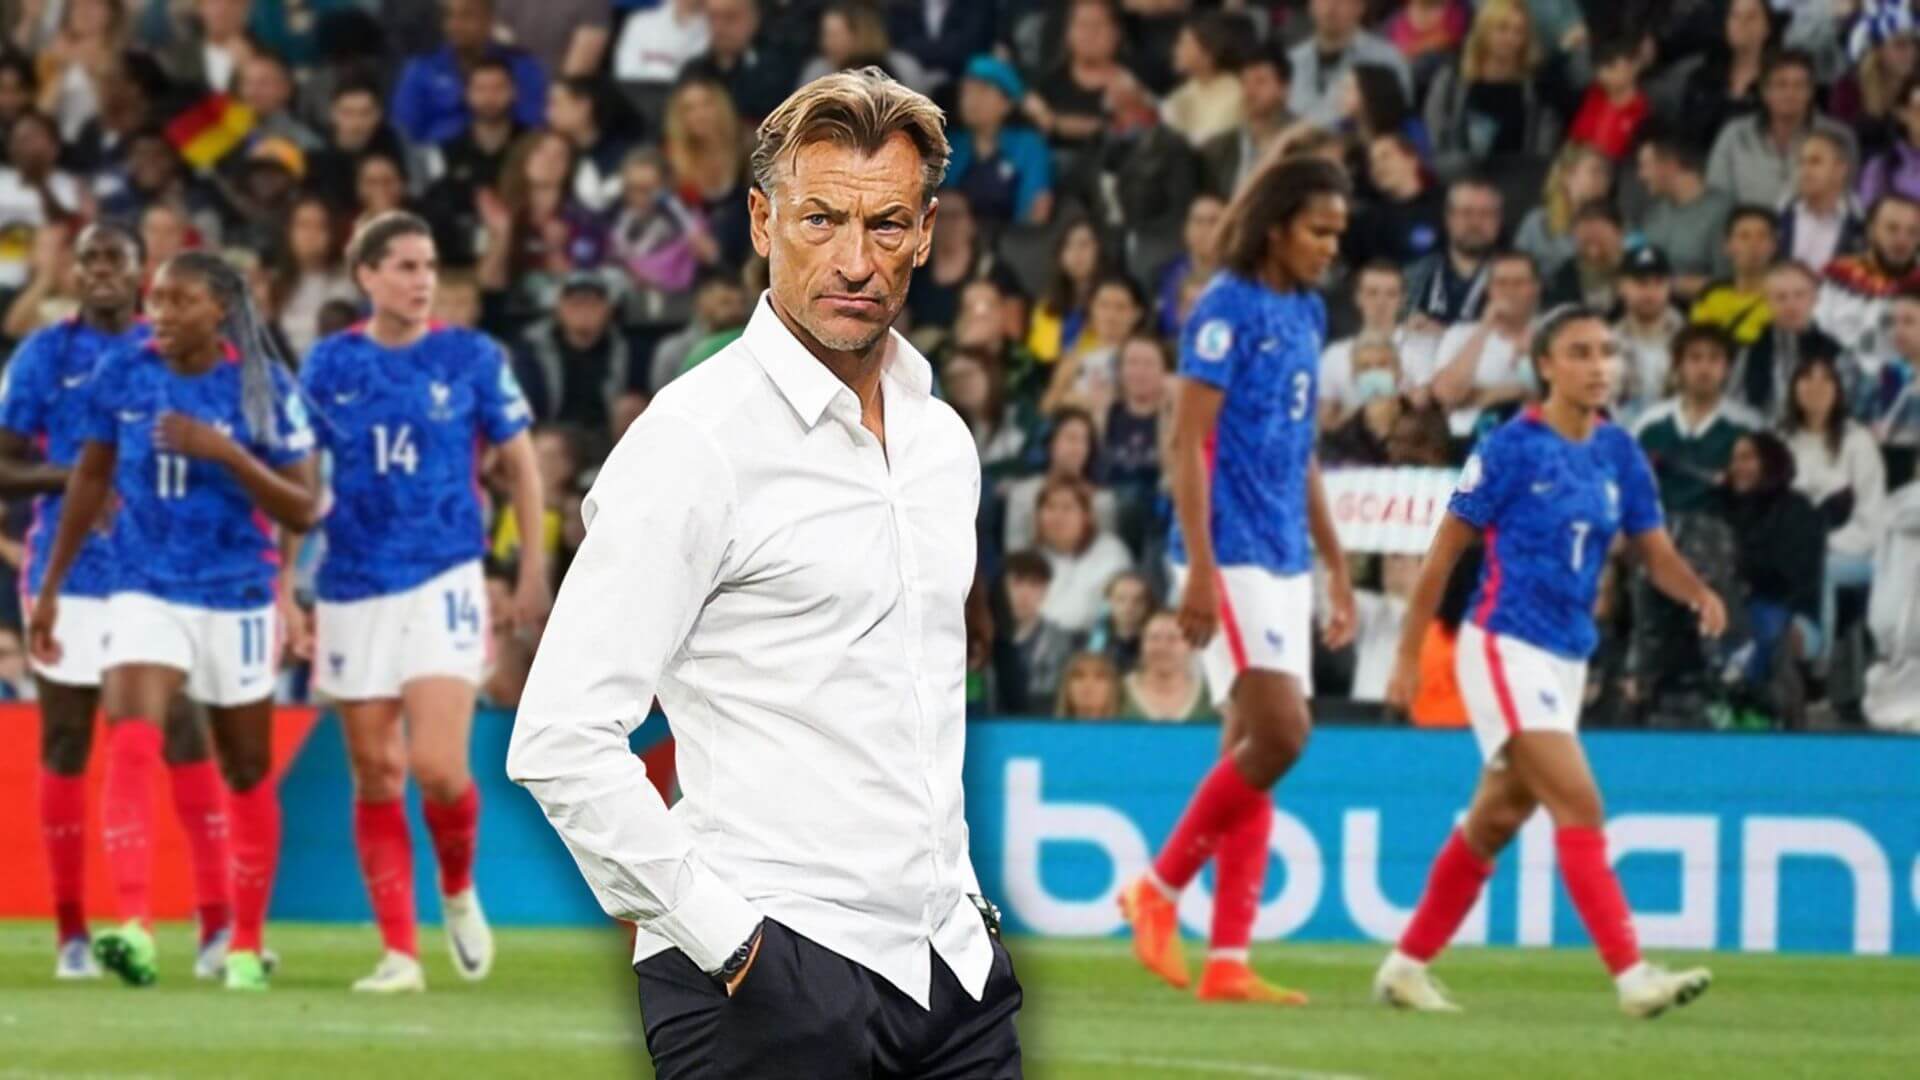 Herve Renard set to become new France Women's head coach : r/soccer